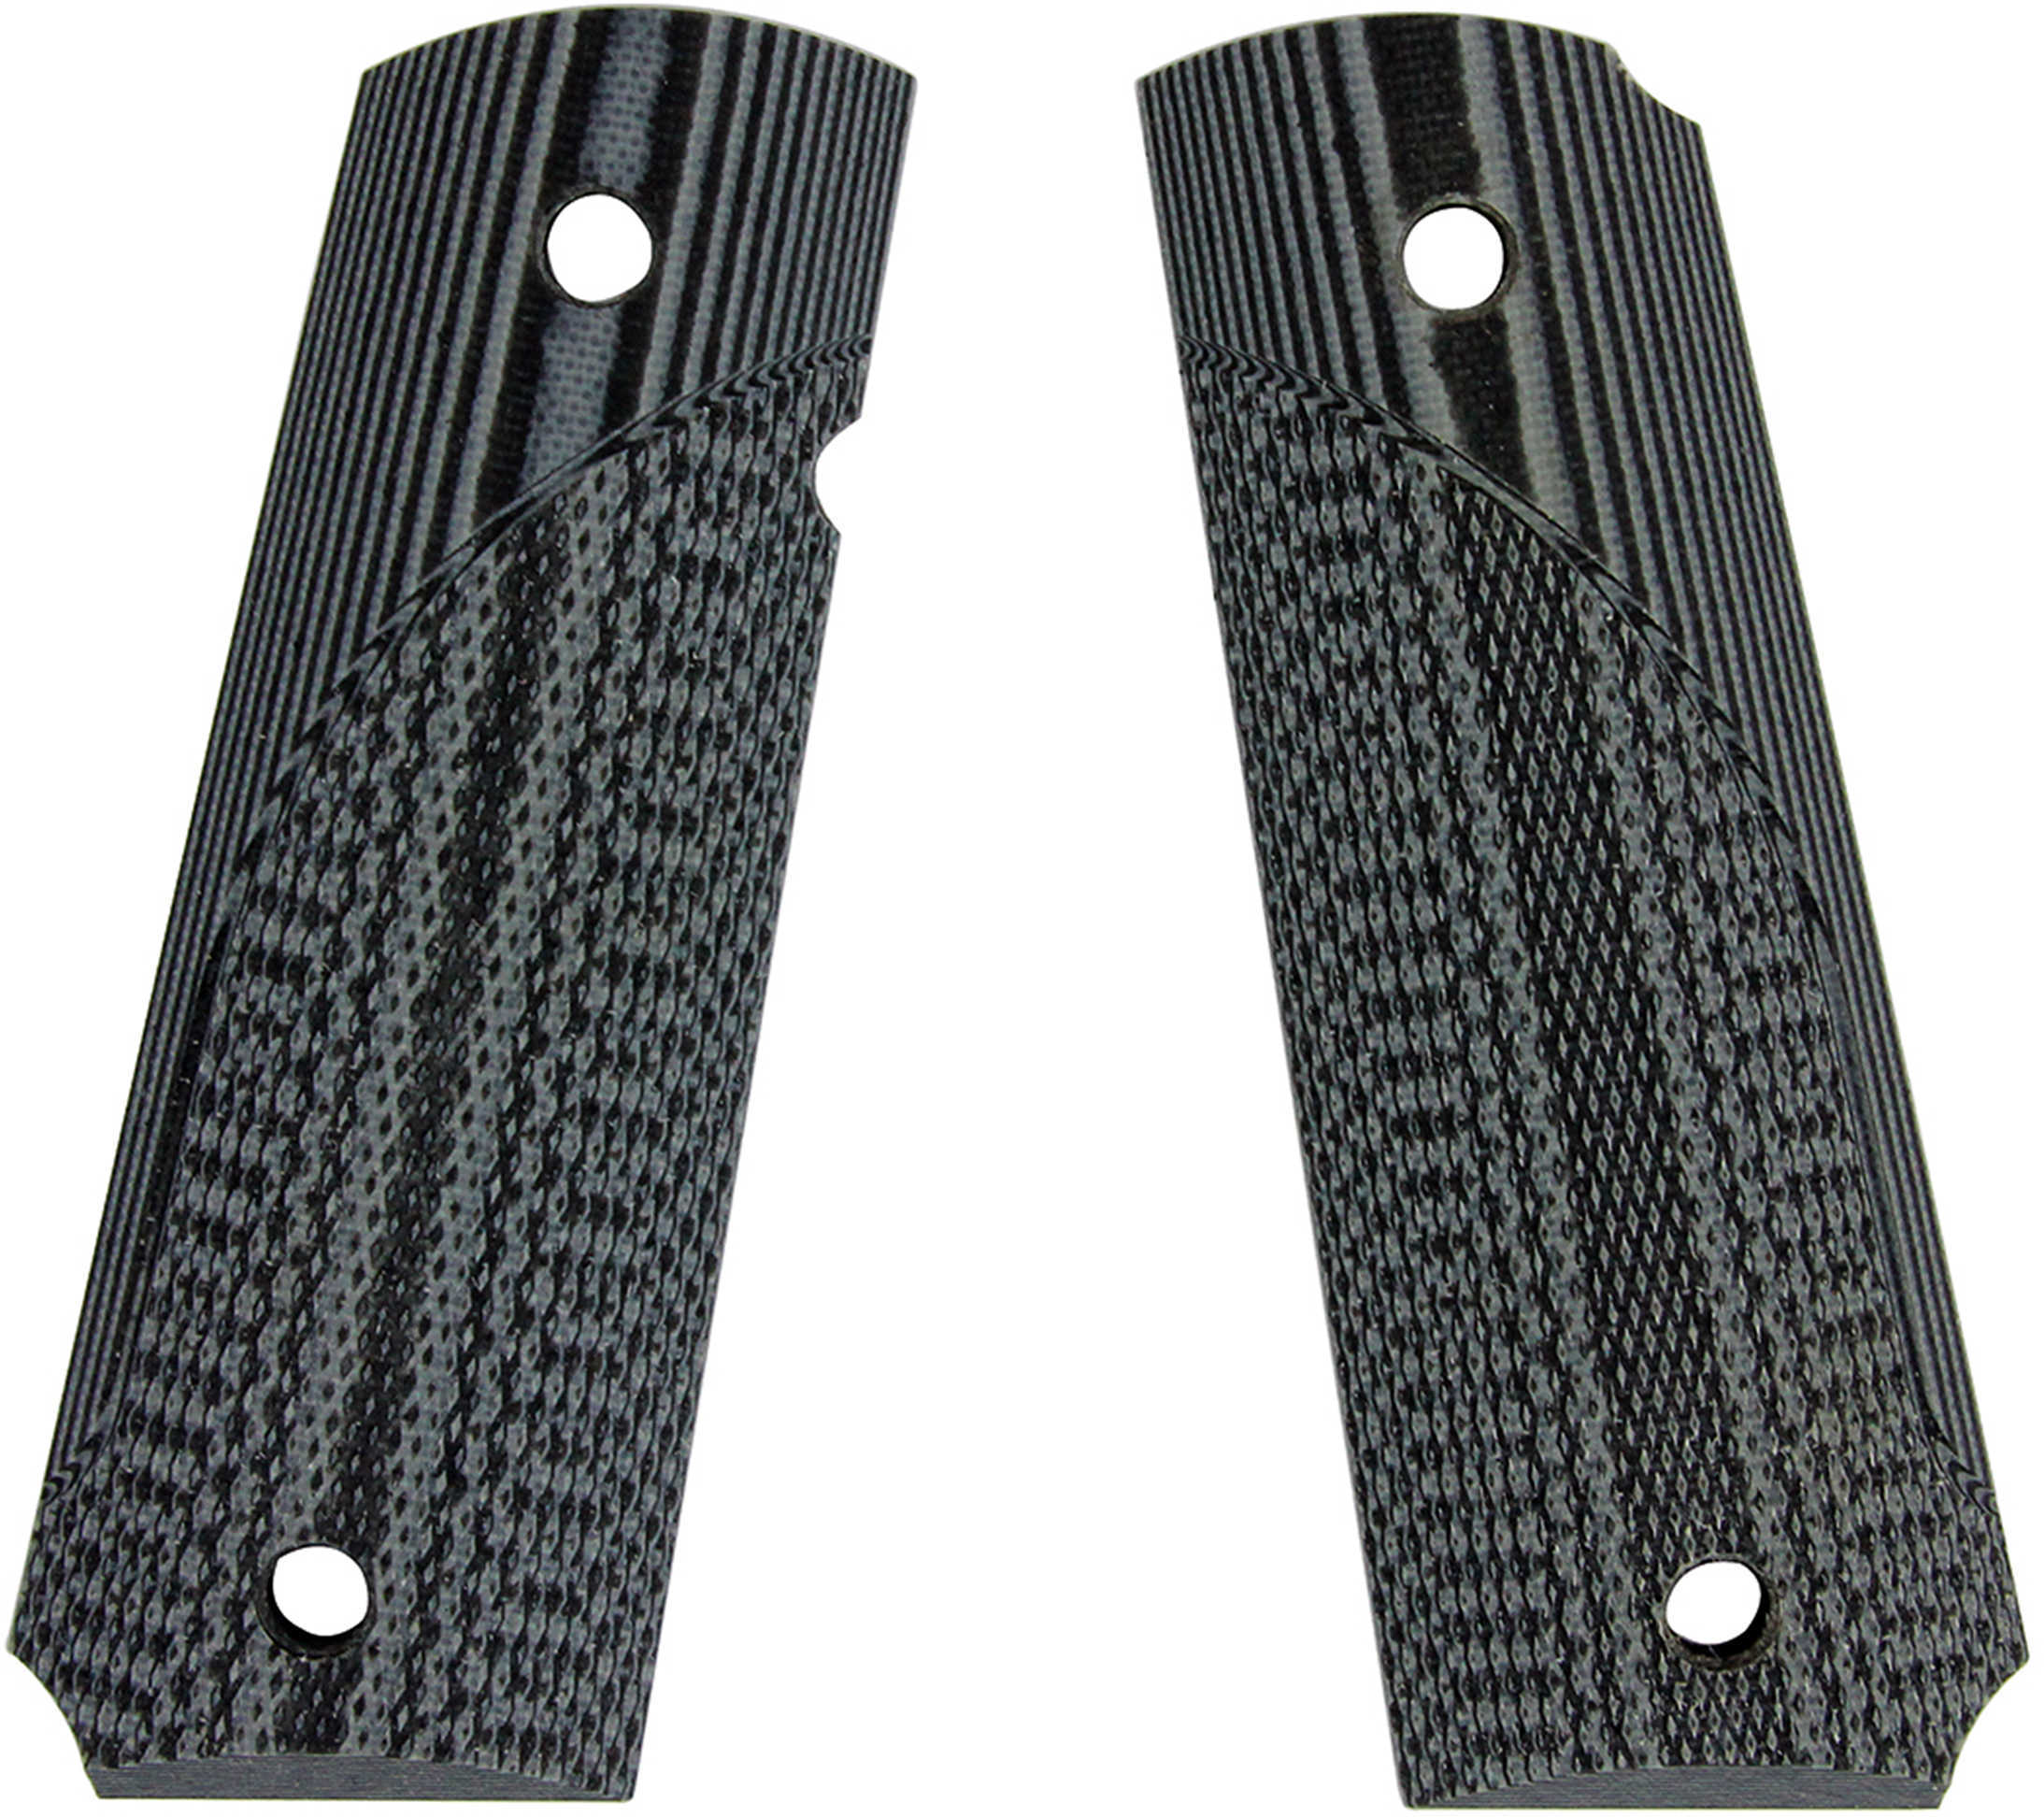 Pachmayr Dominator G10 Grips For 1911 Gray/Black Checkered